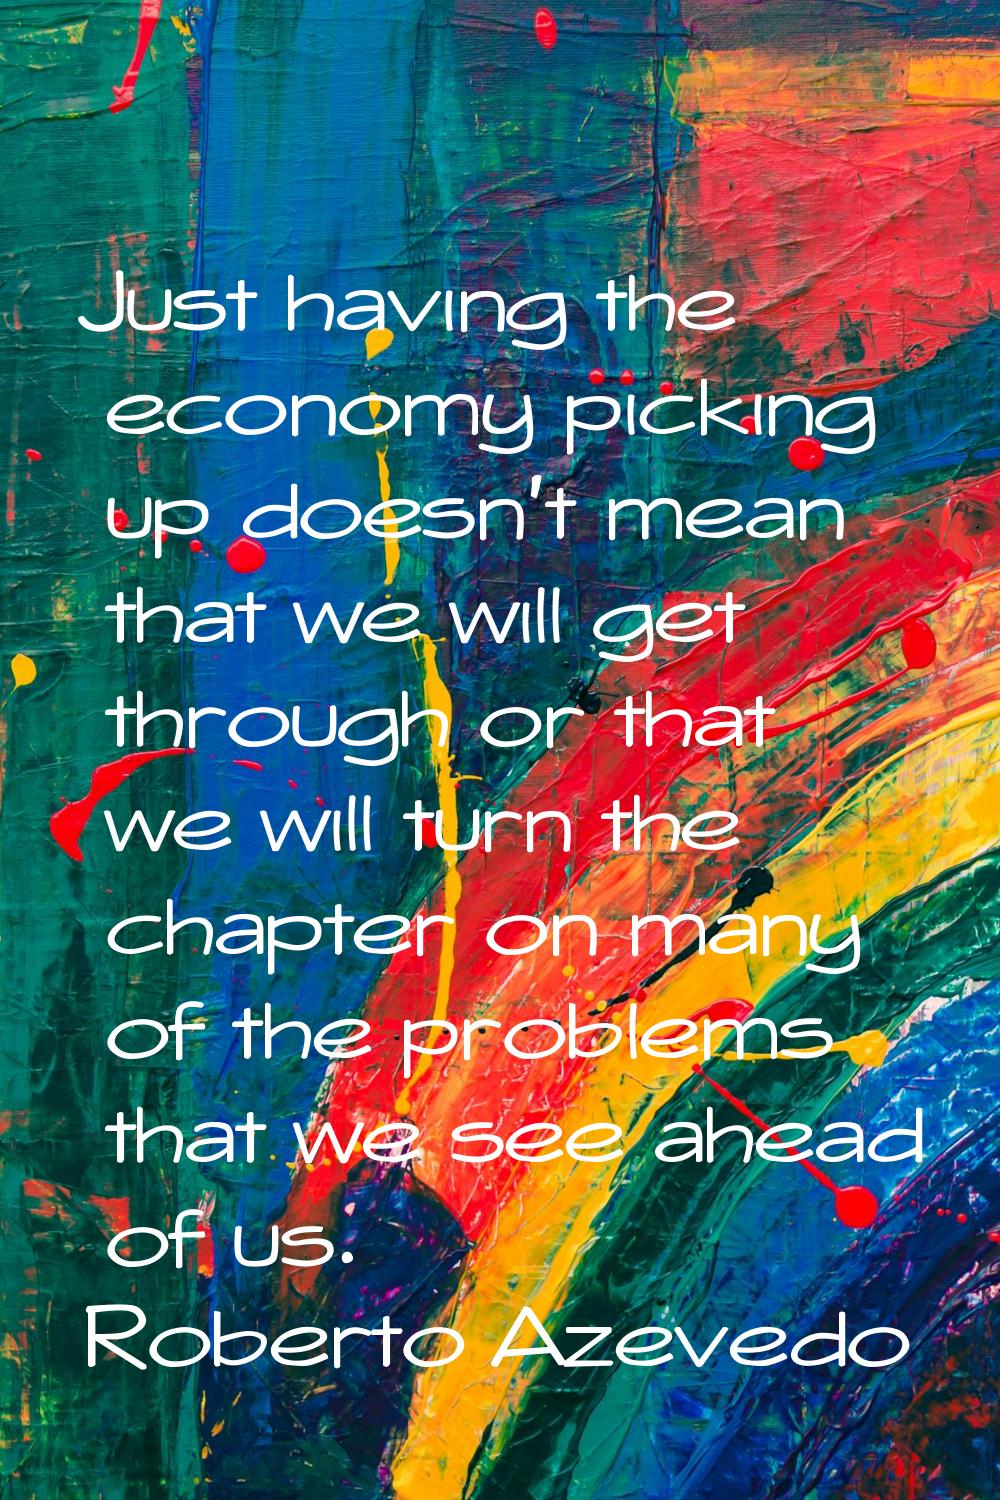 Just having the economy picking up doesn't mean that we will get through or that we will turn the c